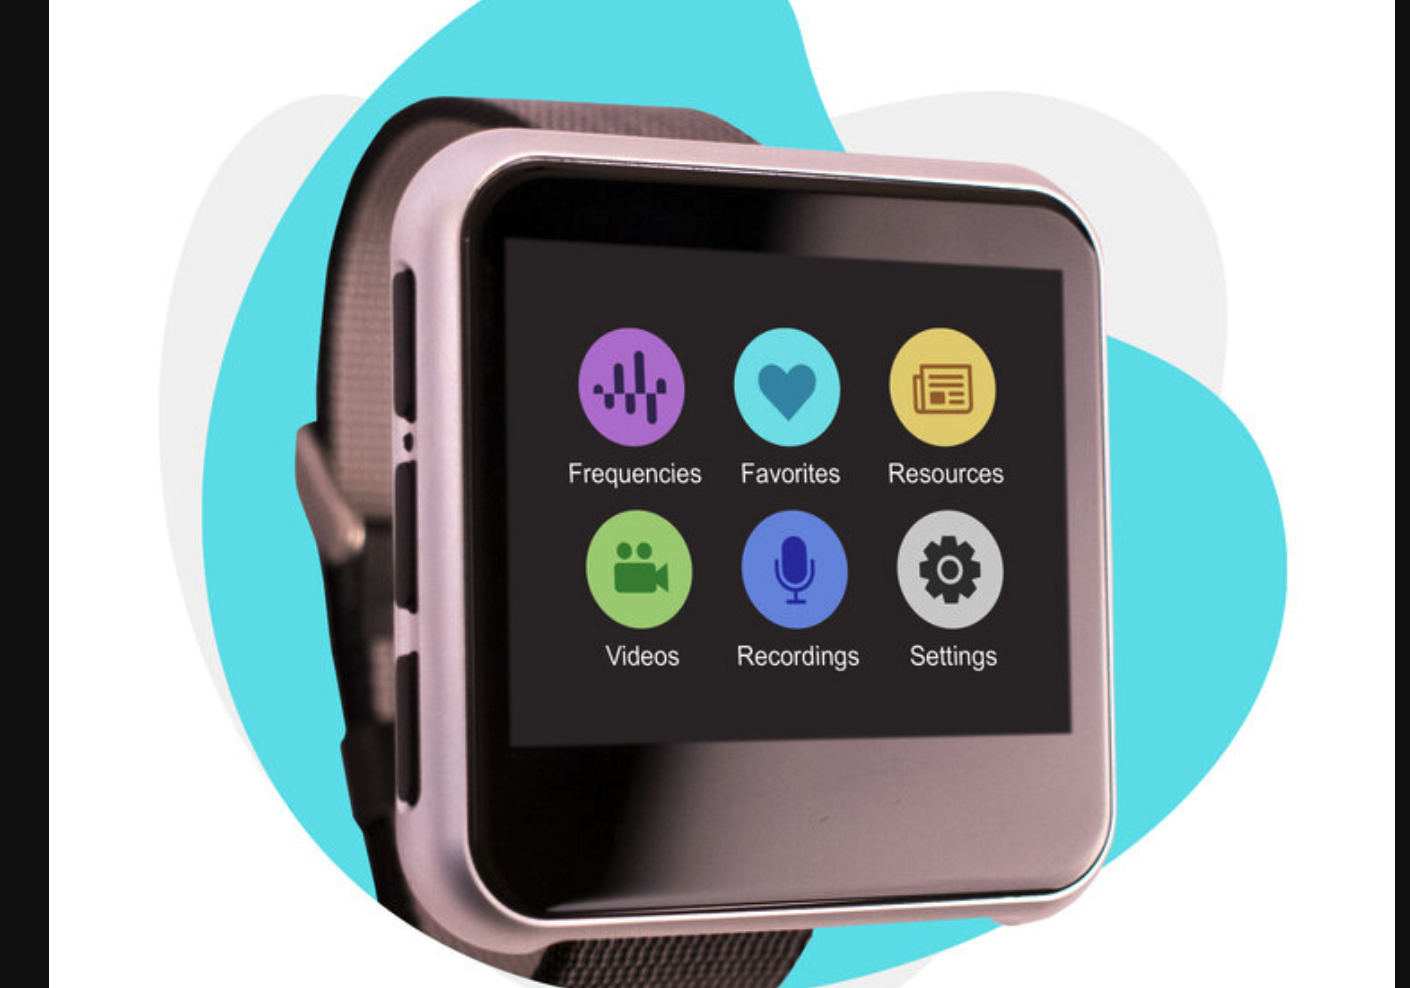 WavWatch can help save money on common health issues we experience